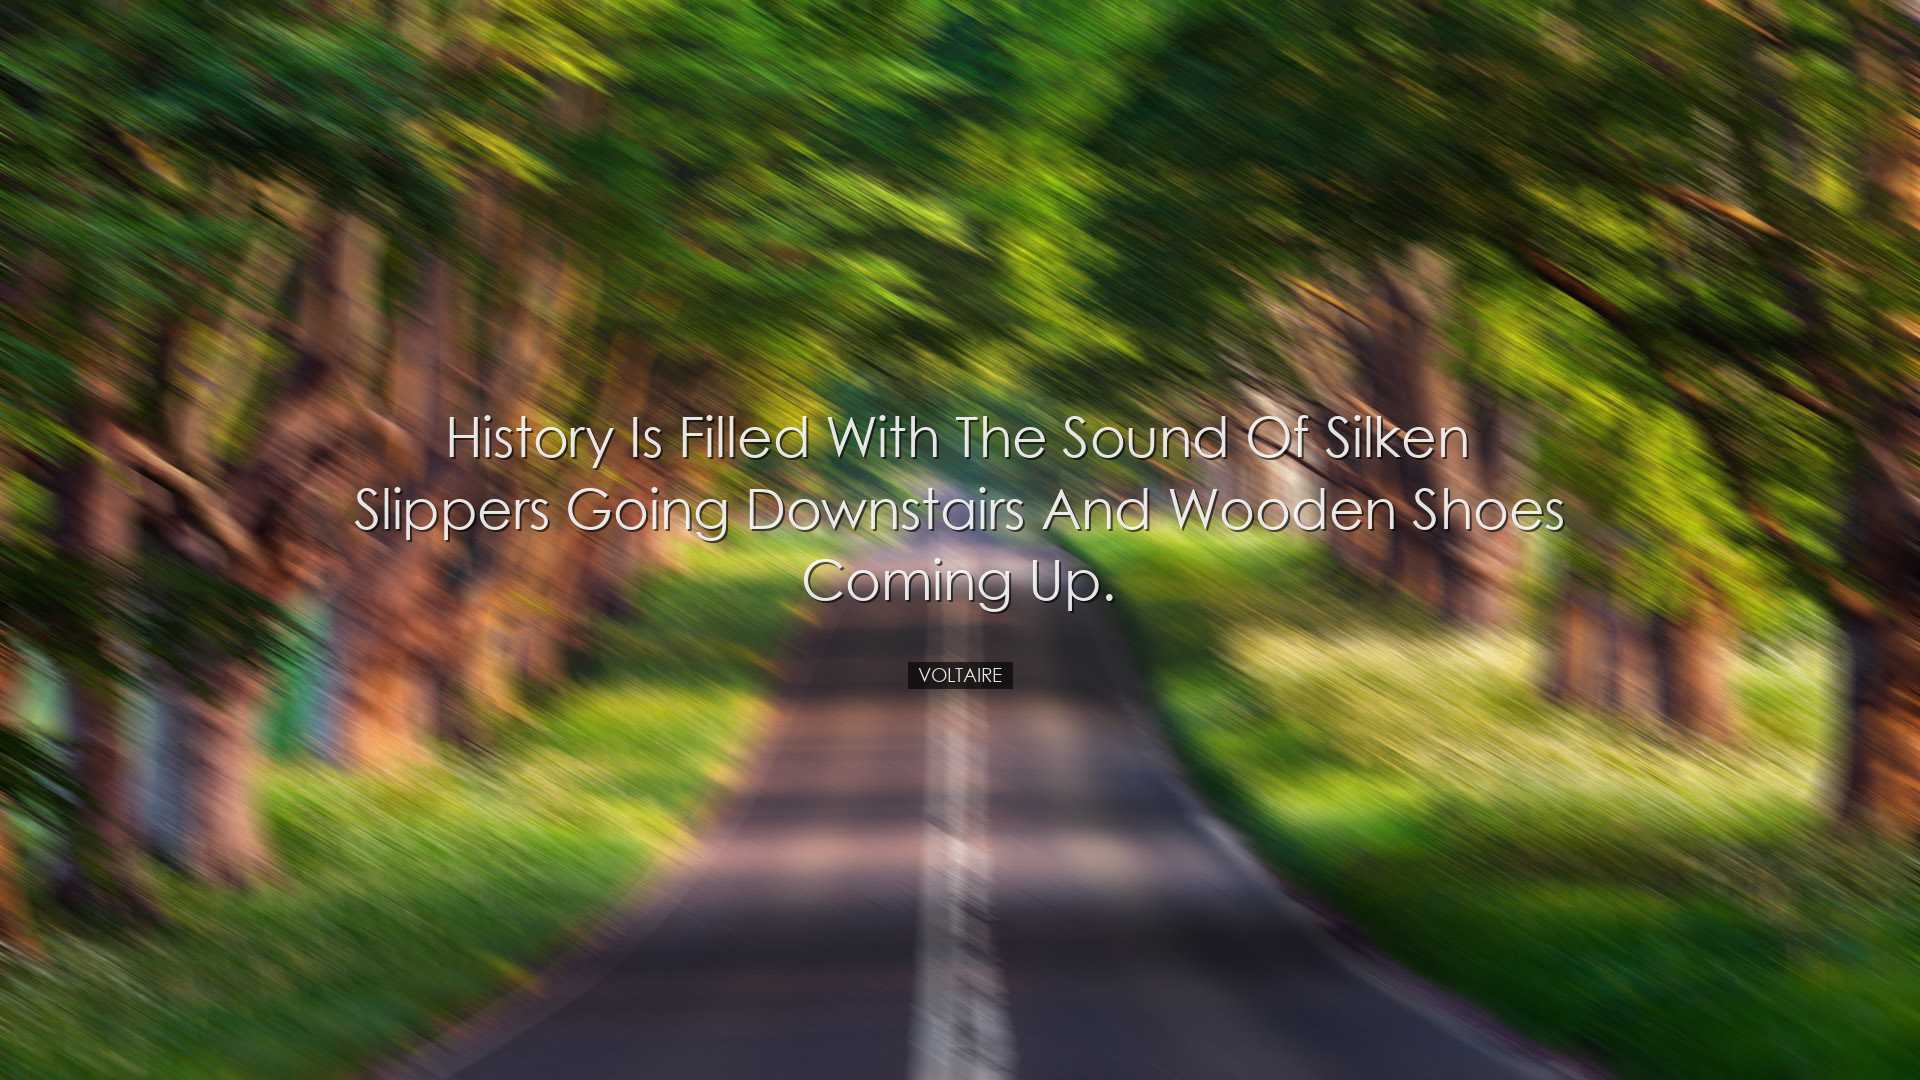 History is filled with the sound of silken slippers going downstai